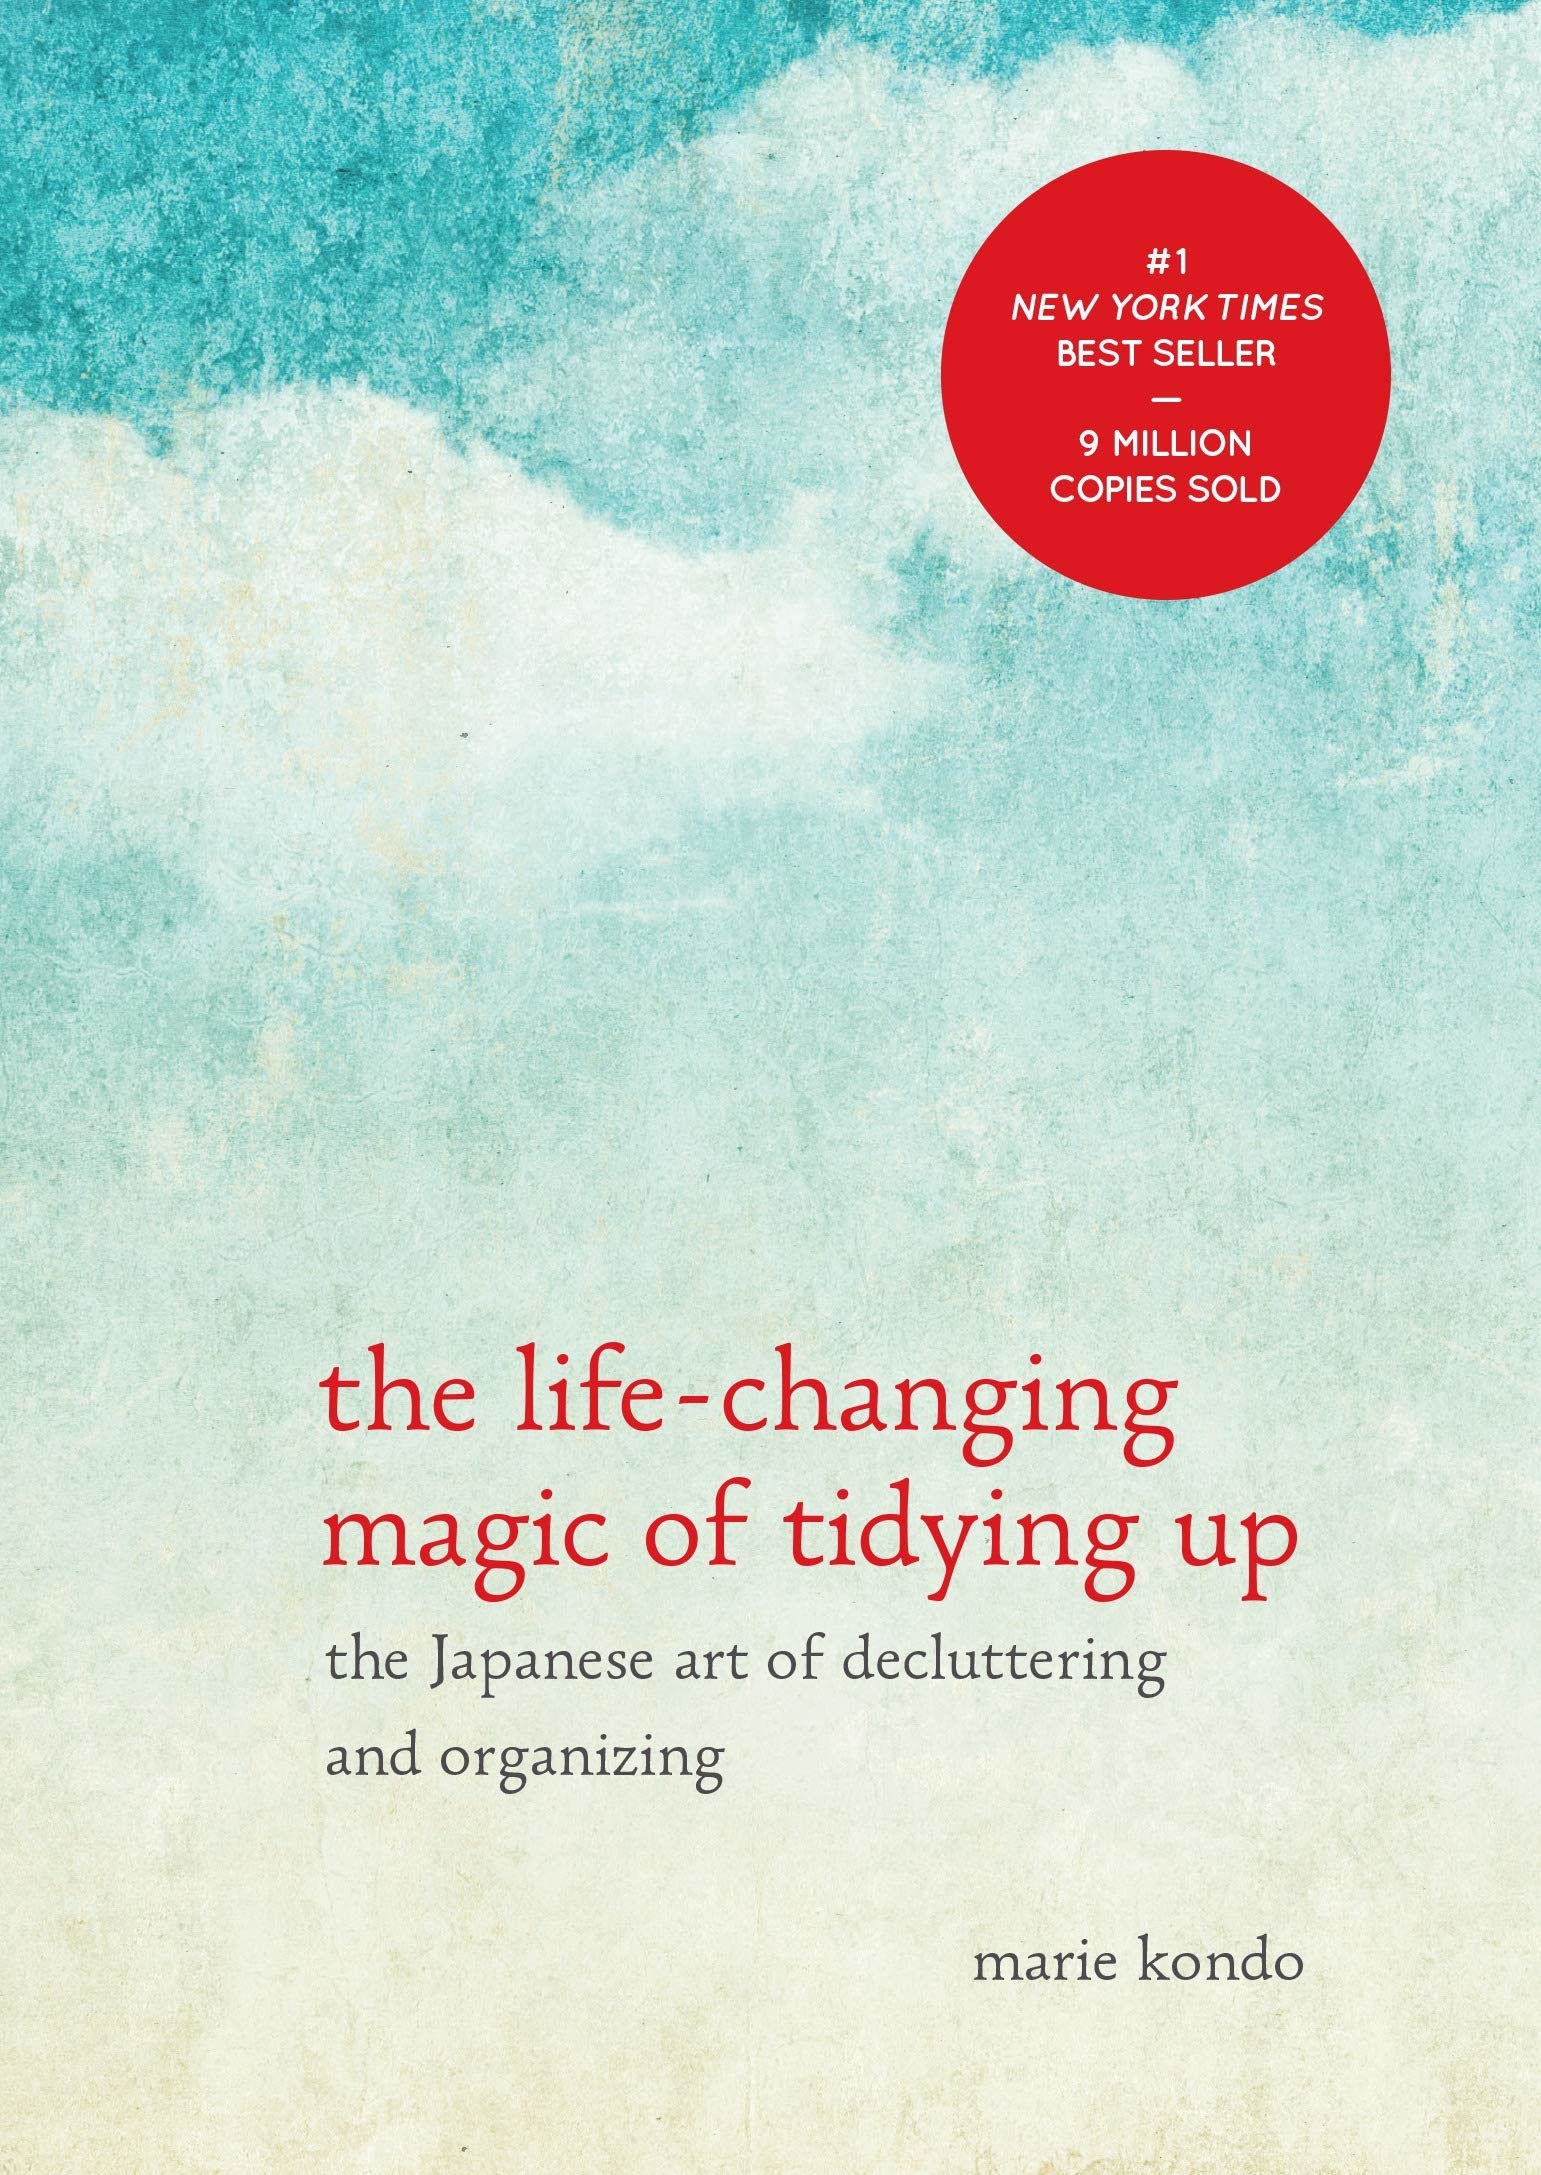 the cover of &quot;the life-changing magic of tidying up&quot; by marie kondo